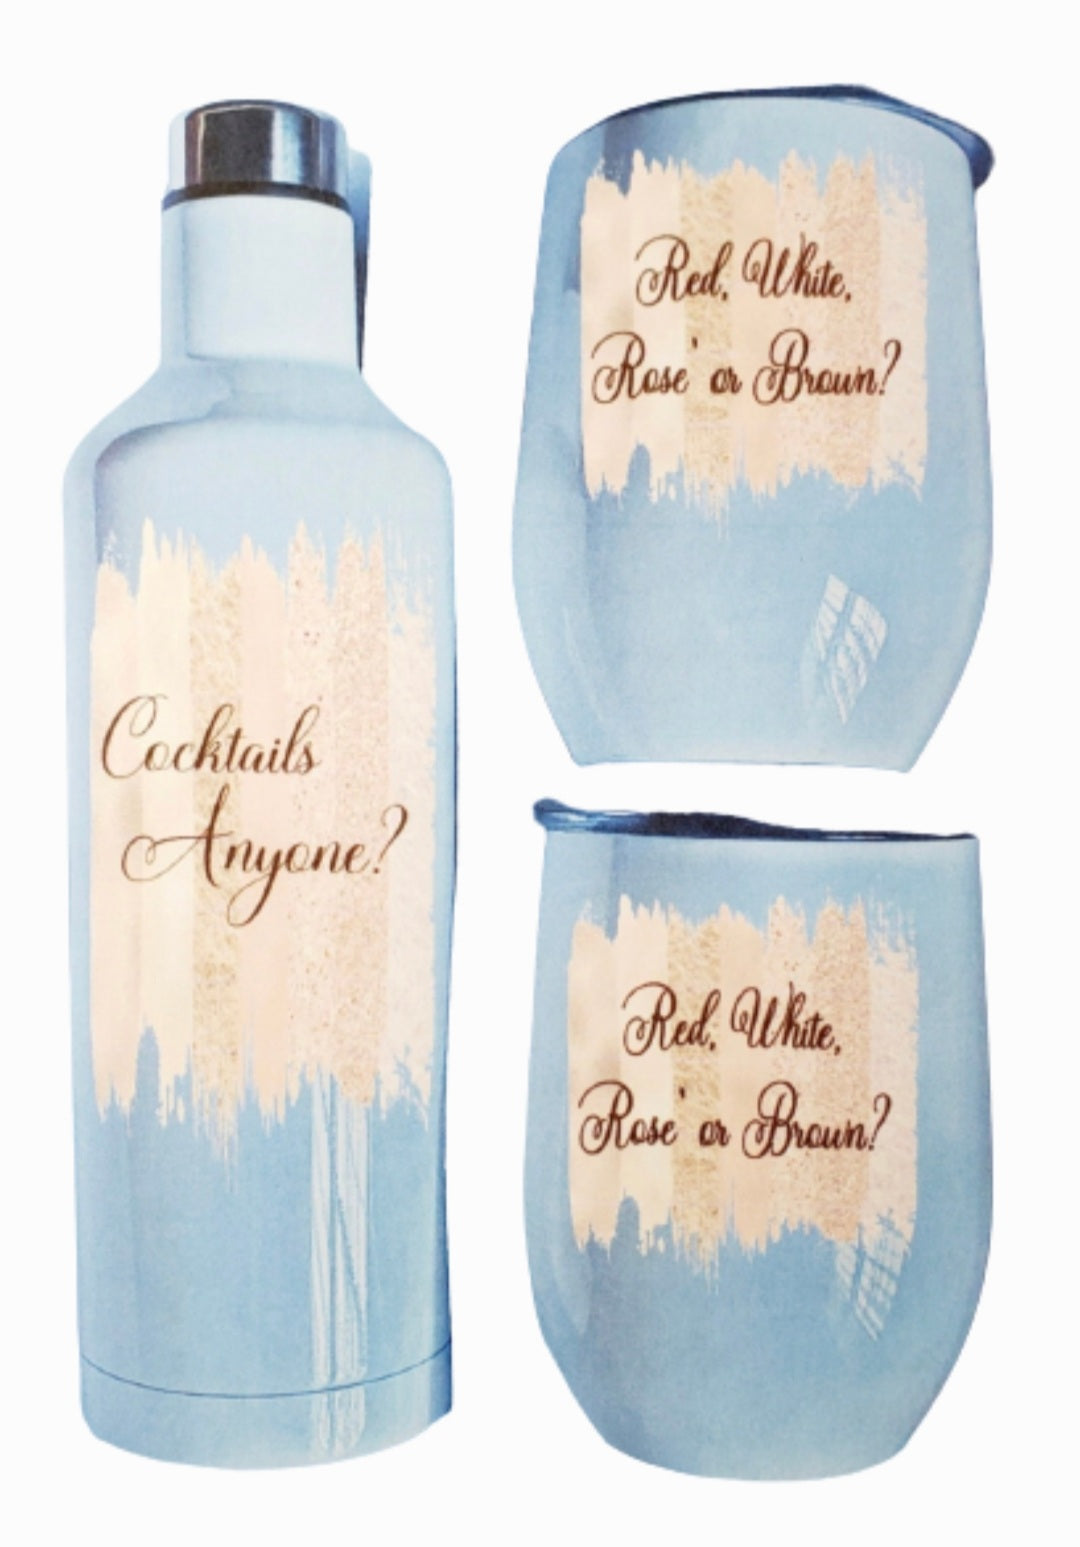 Gifts & Accessories - Delightful Drinkware - Tumblers, Mugs & More